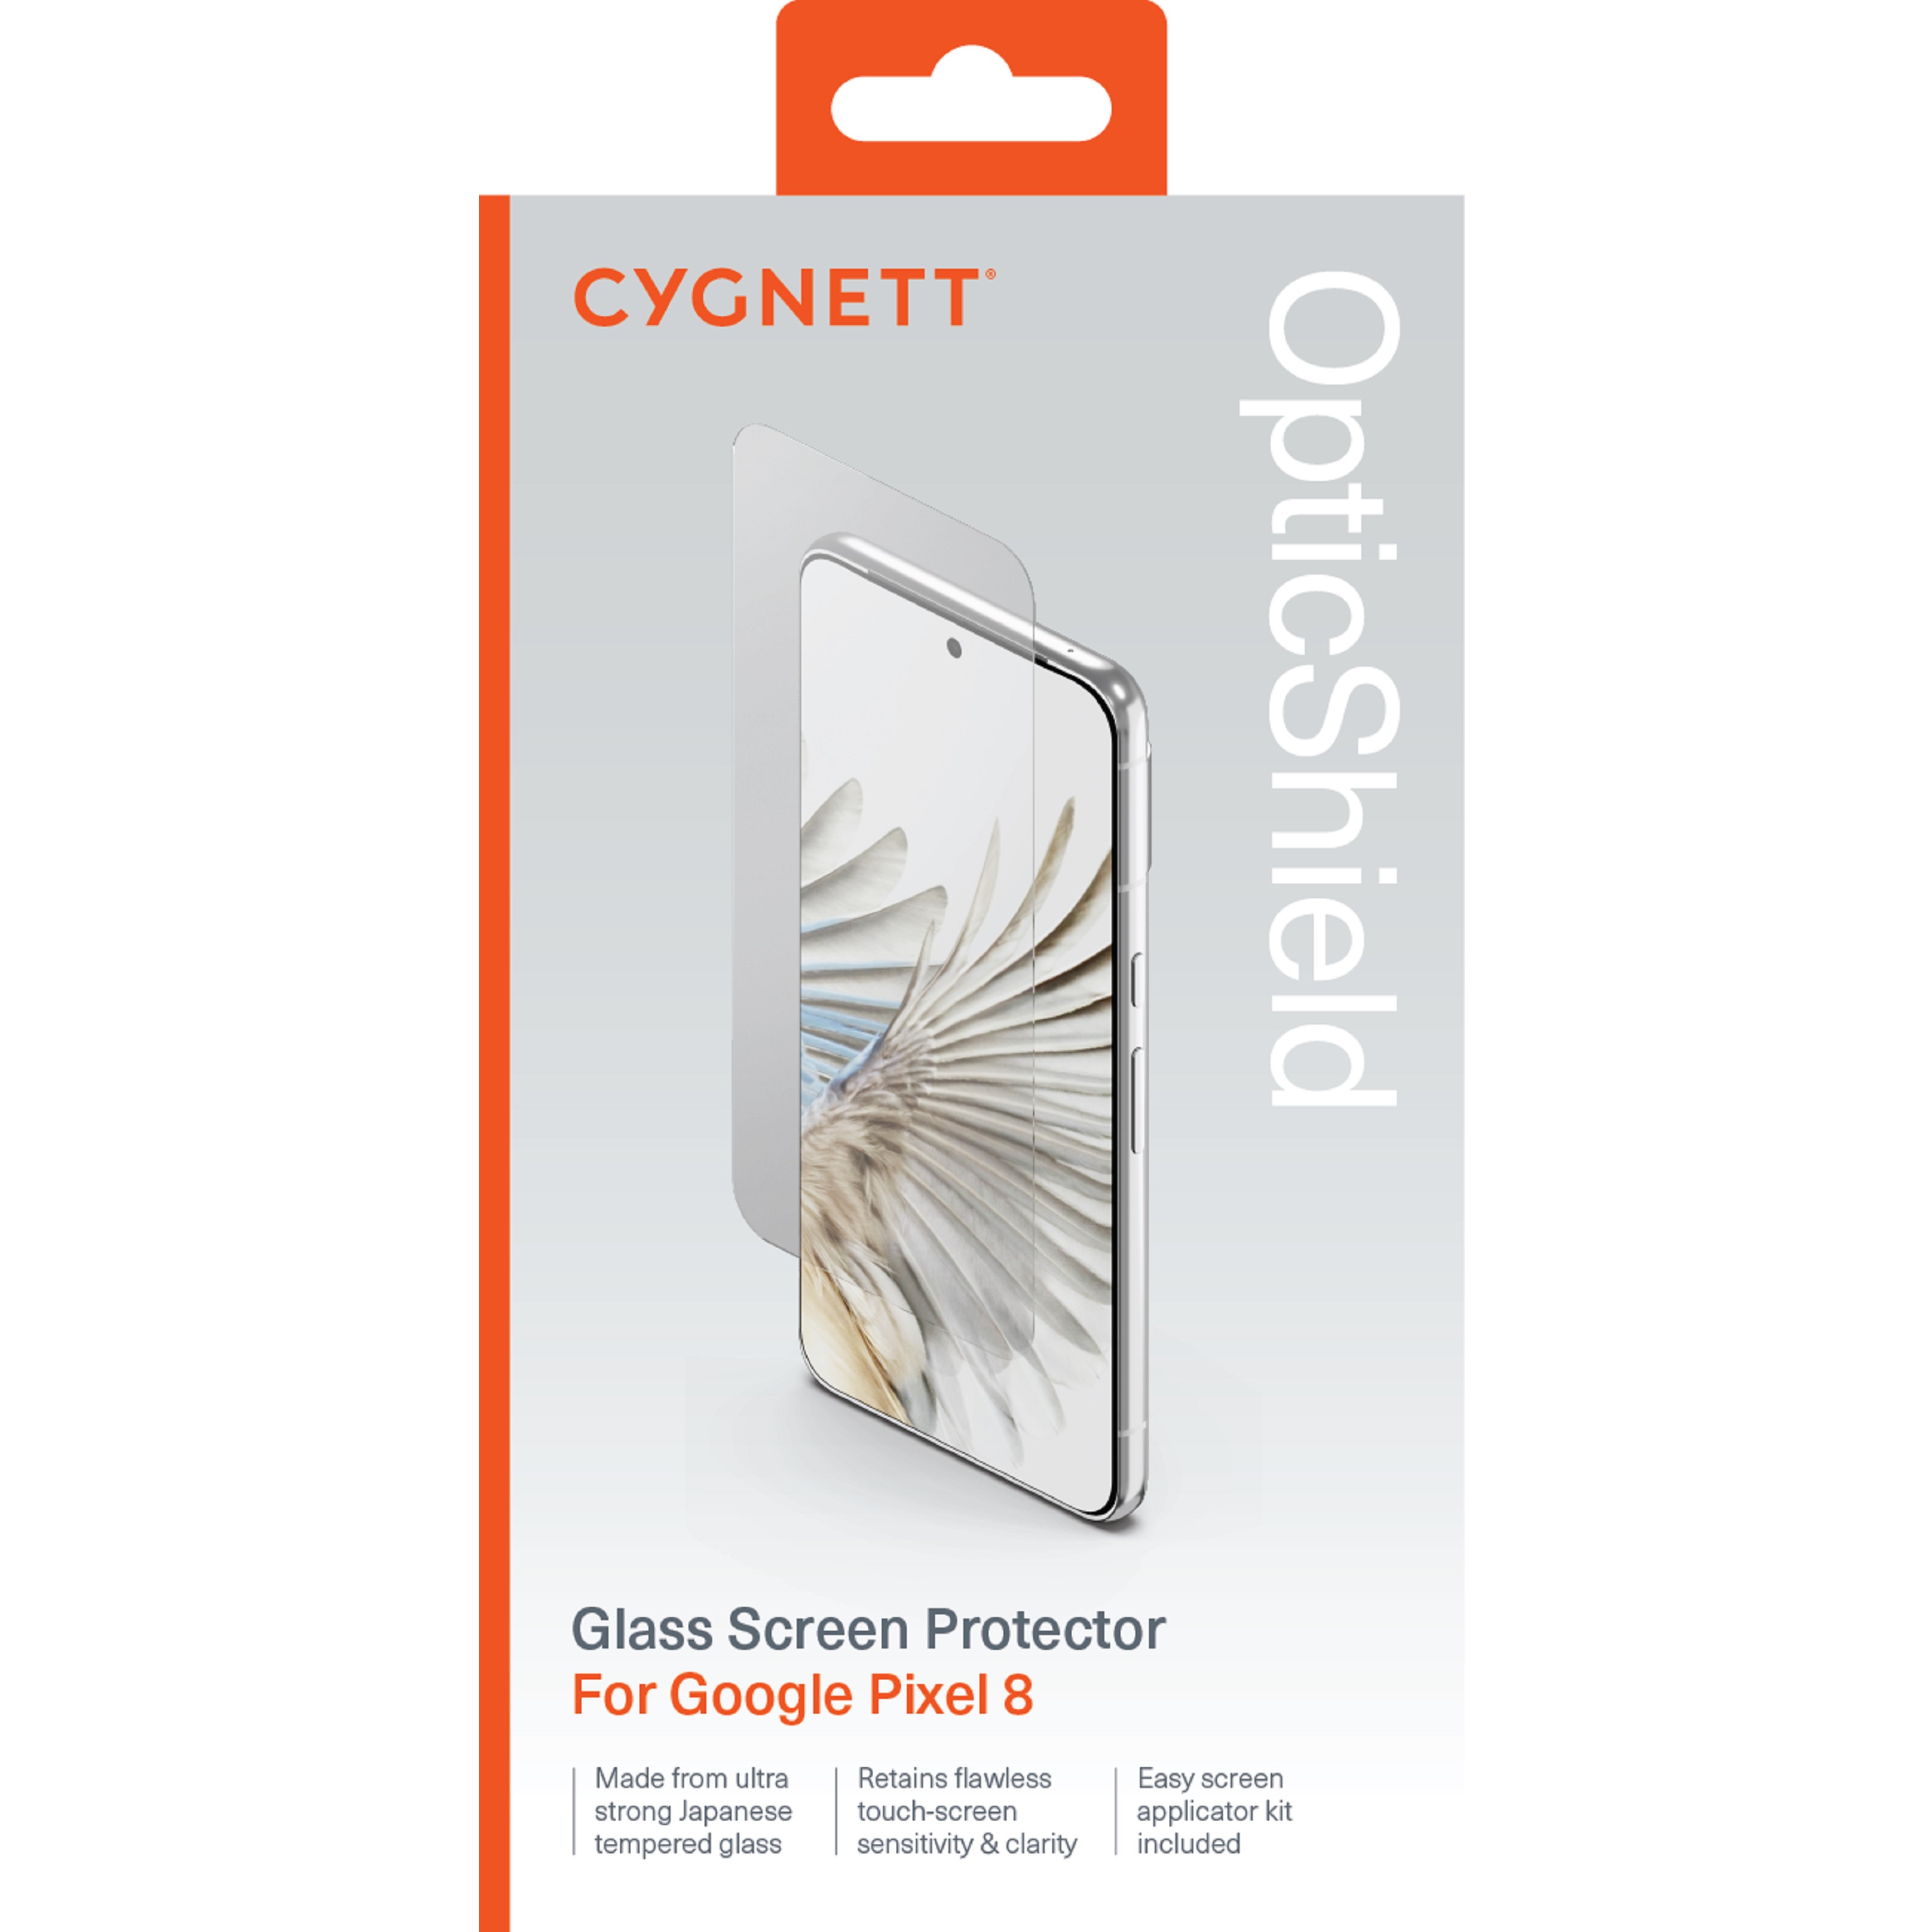 Cygnett OpticShield Google Pixel 8 (6.2″) Japanese Tempered Glass Screen Protector – (CY4758CPTGL), Superior Impact Absorption, Scratch Resistant